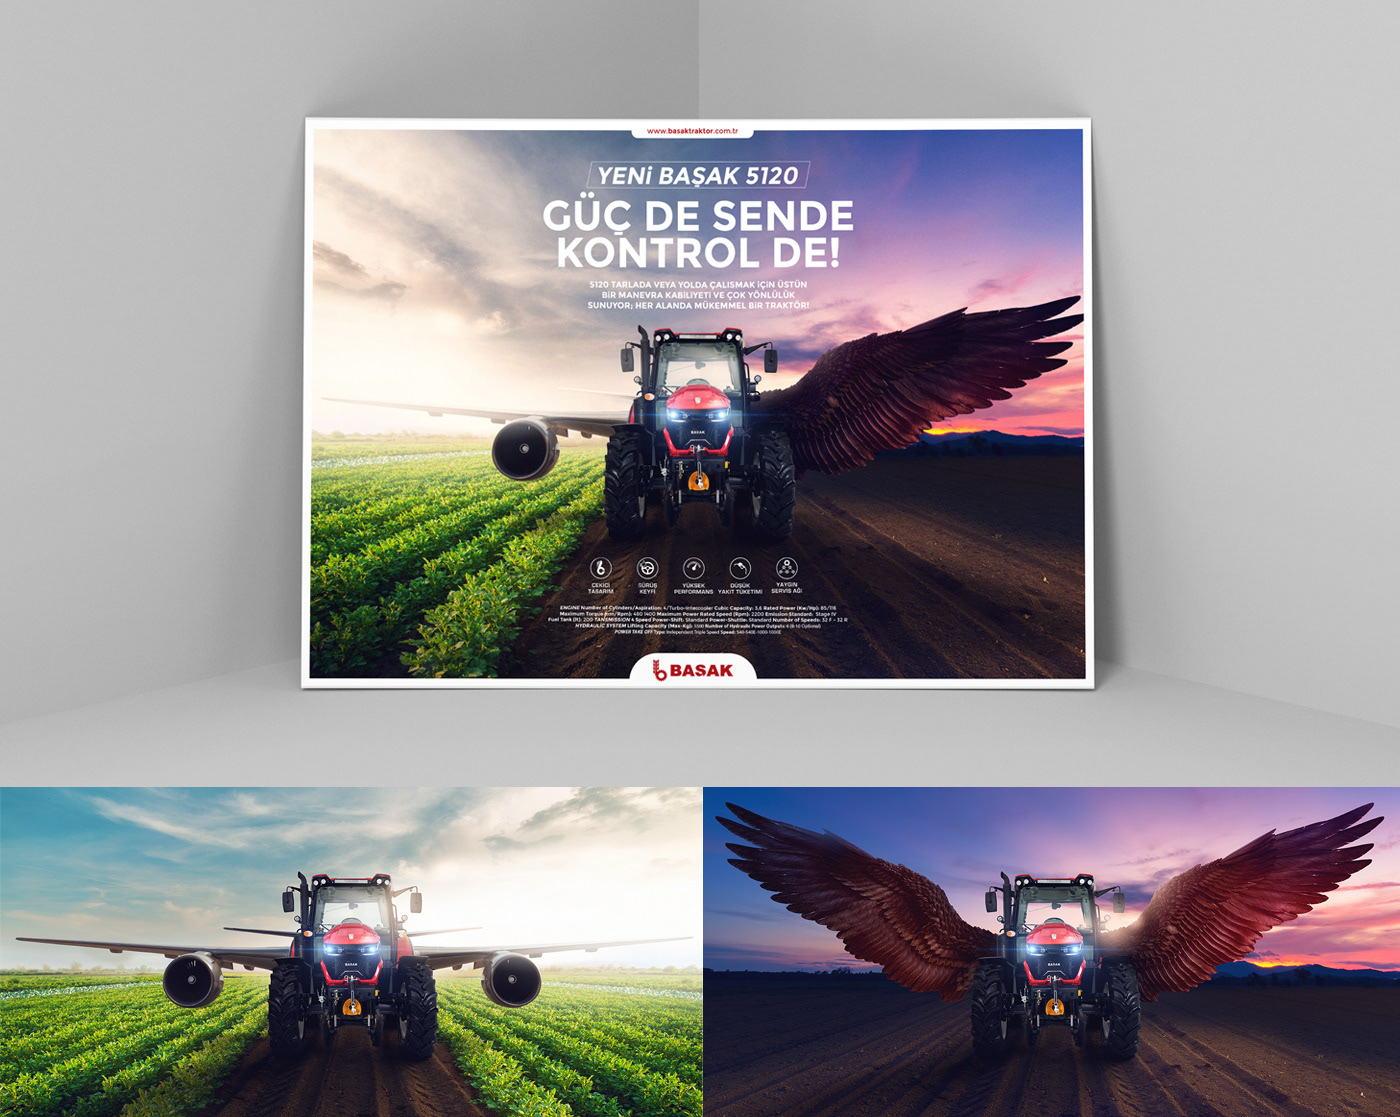 Tractor key visual poster Vehicle farm advertisement car manipulation agriculture billboard